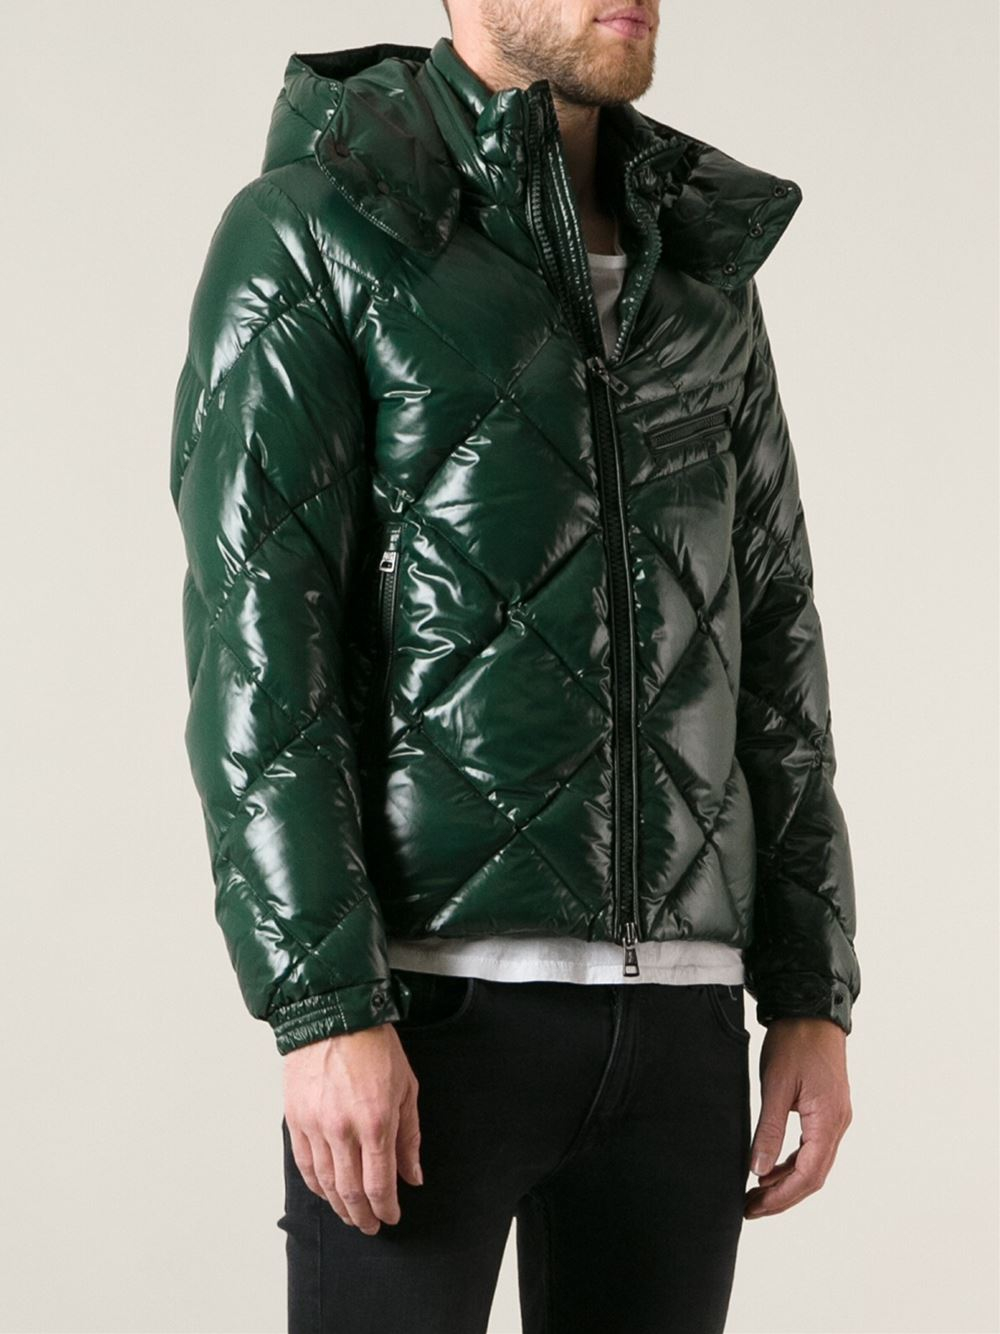 Moncler Newman Padded Jacket in Green for Men - Lyst